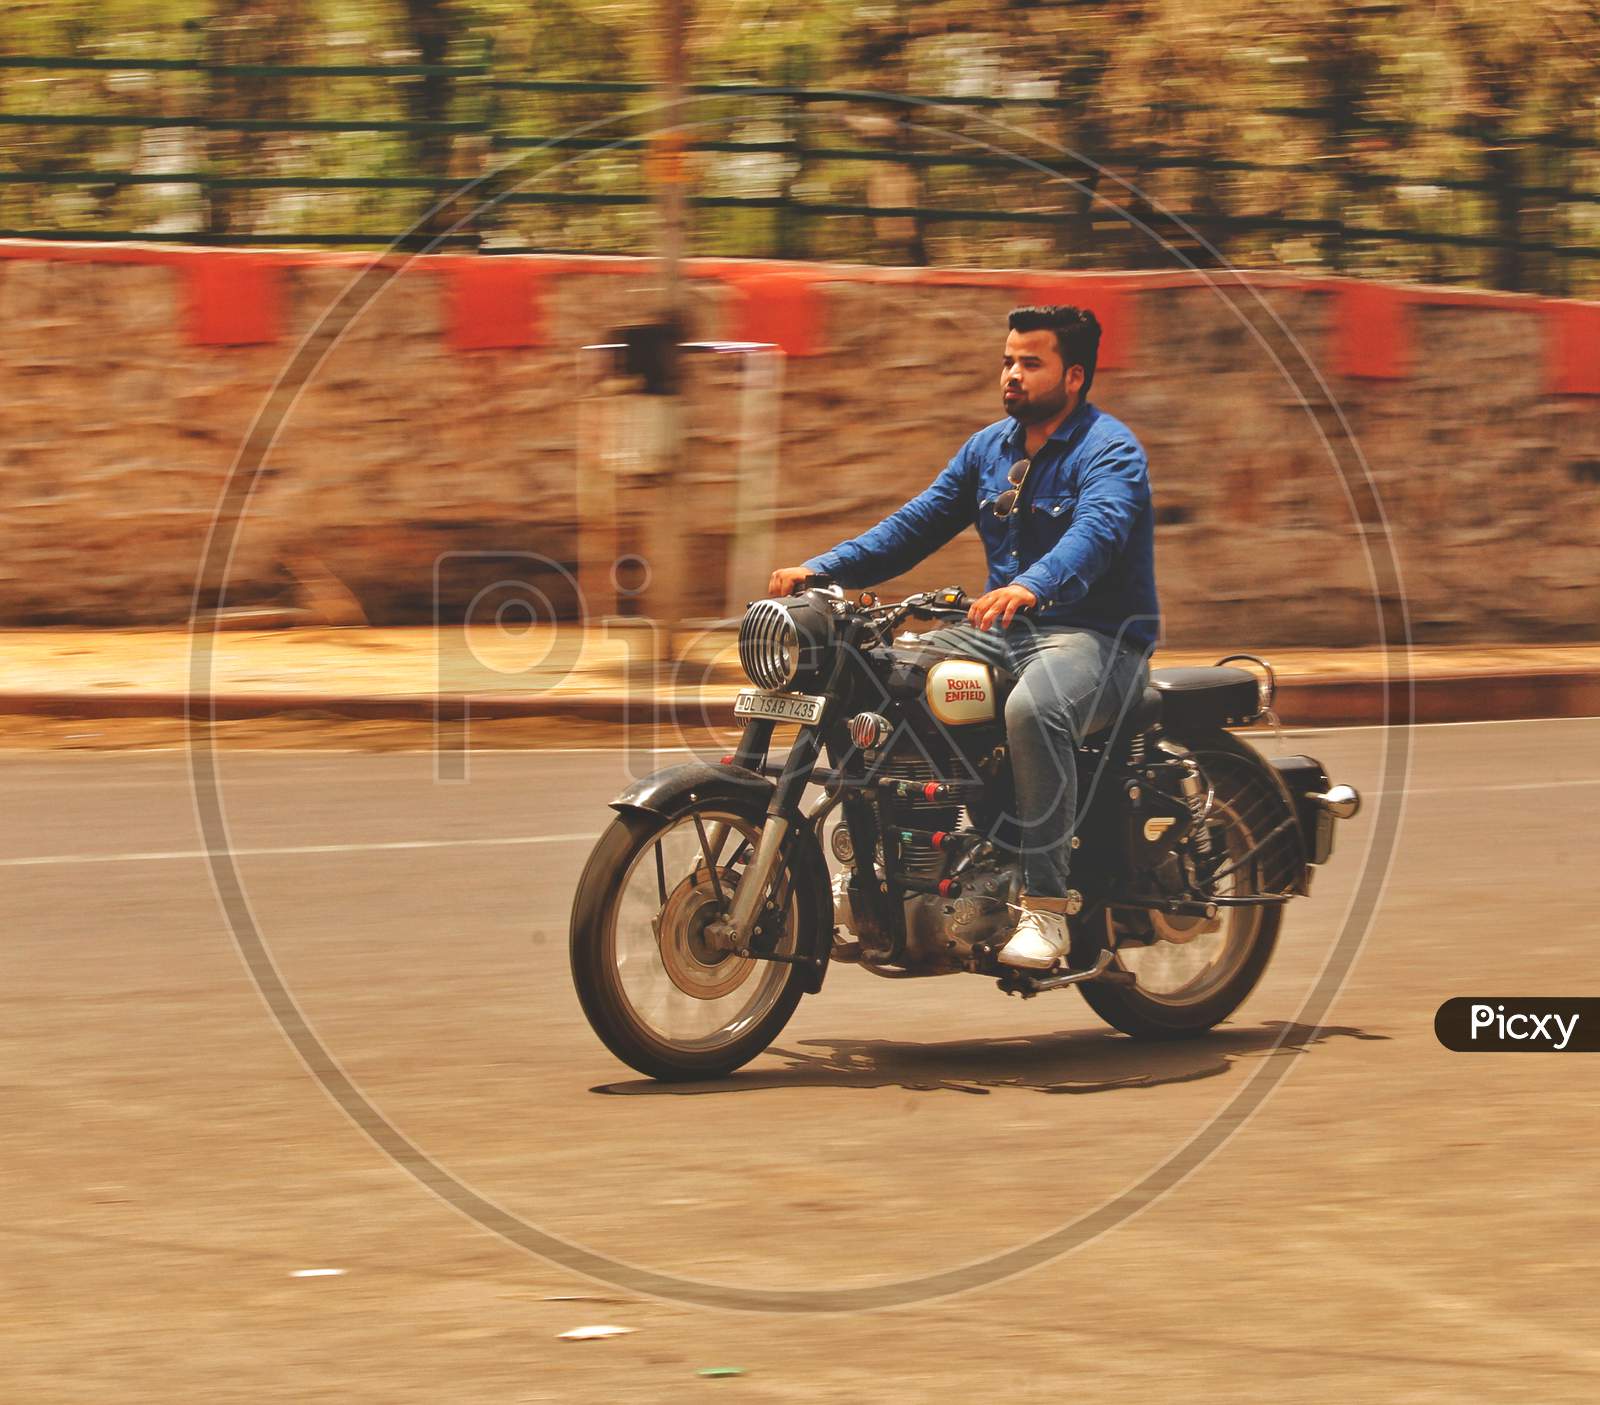 Delhi, India - 17 February 2019: Riding On A Bullet (Blurred Motion).